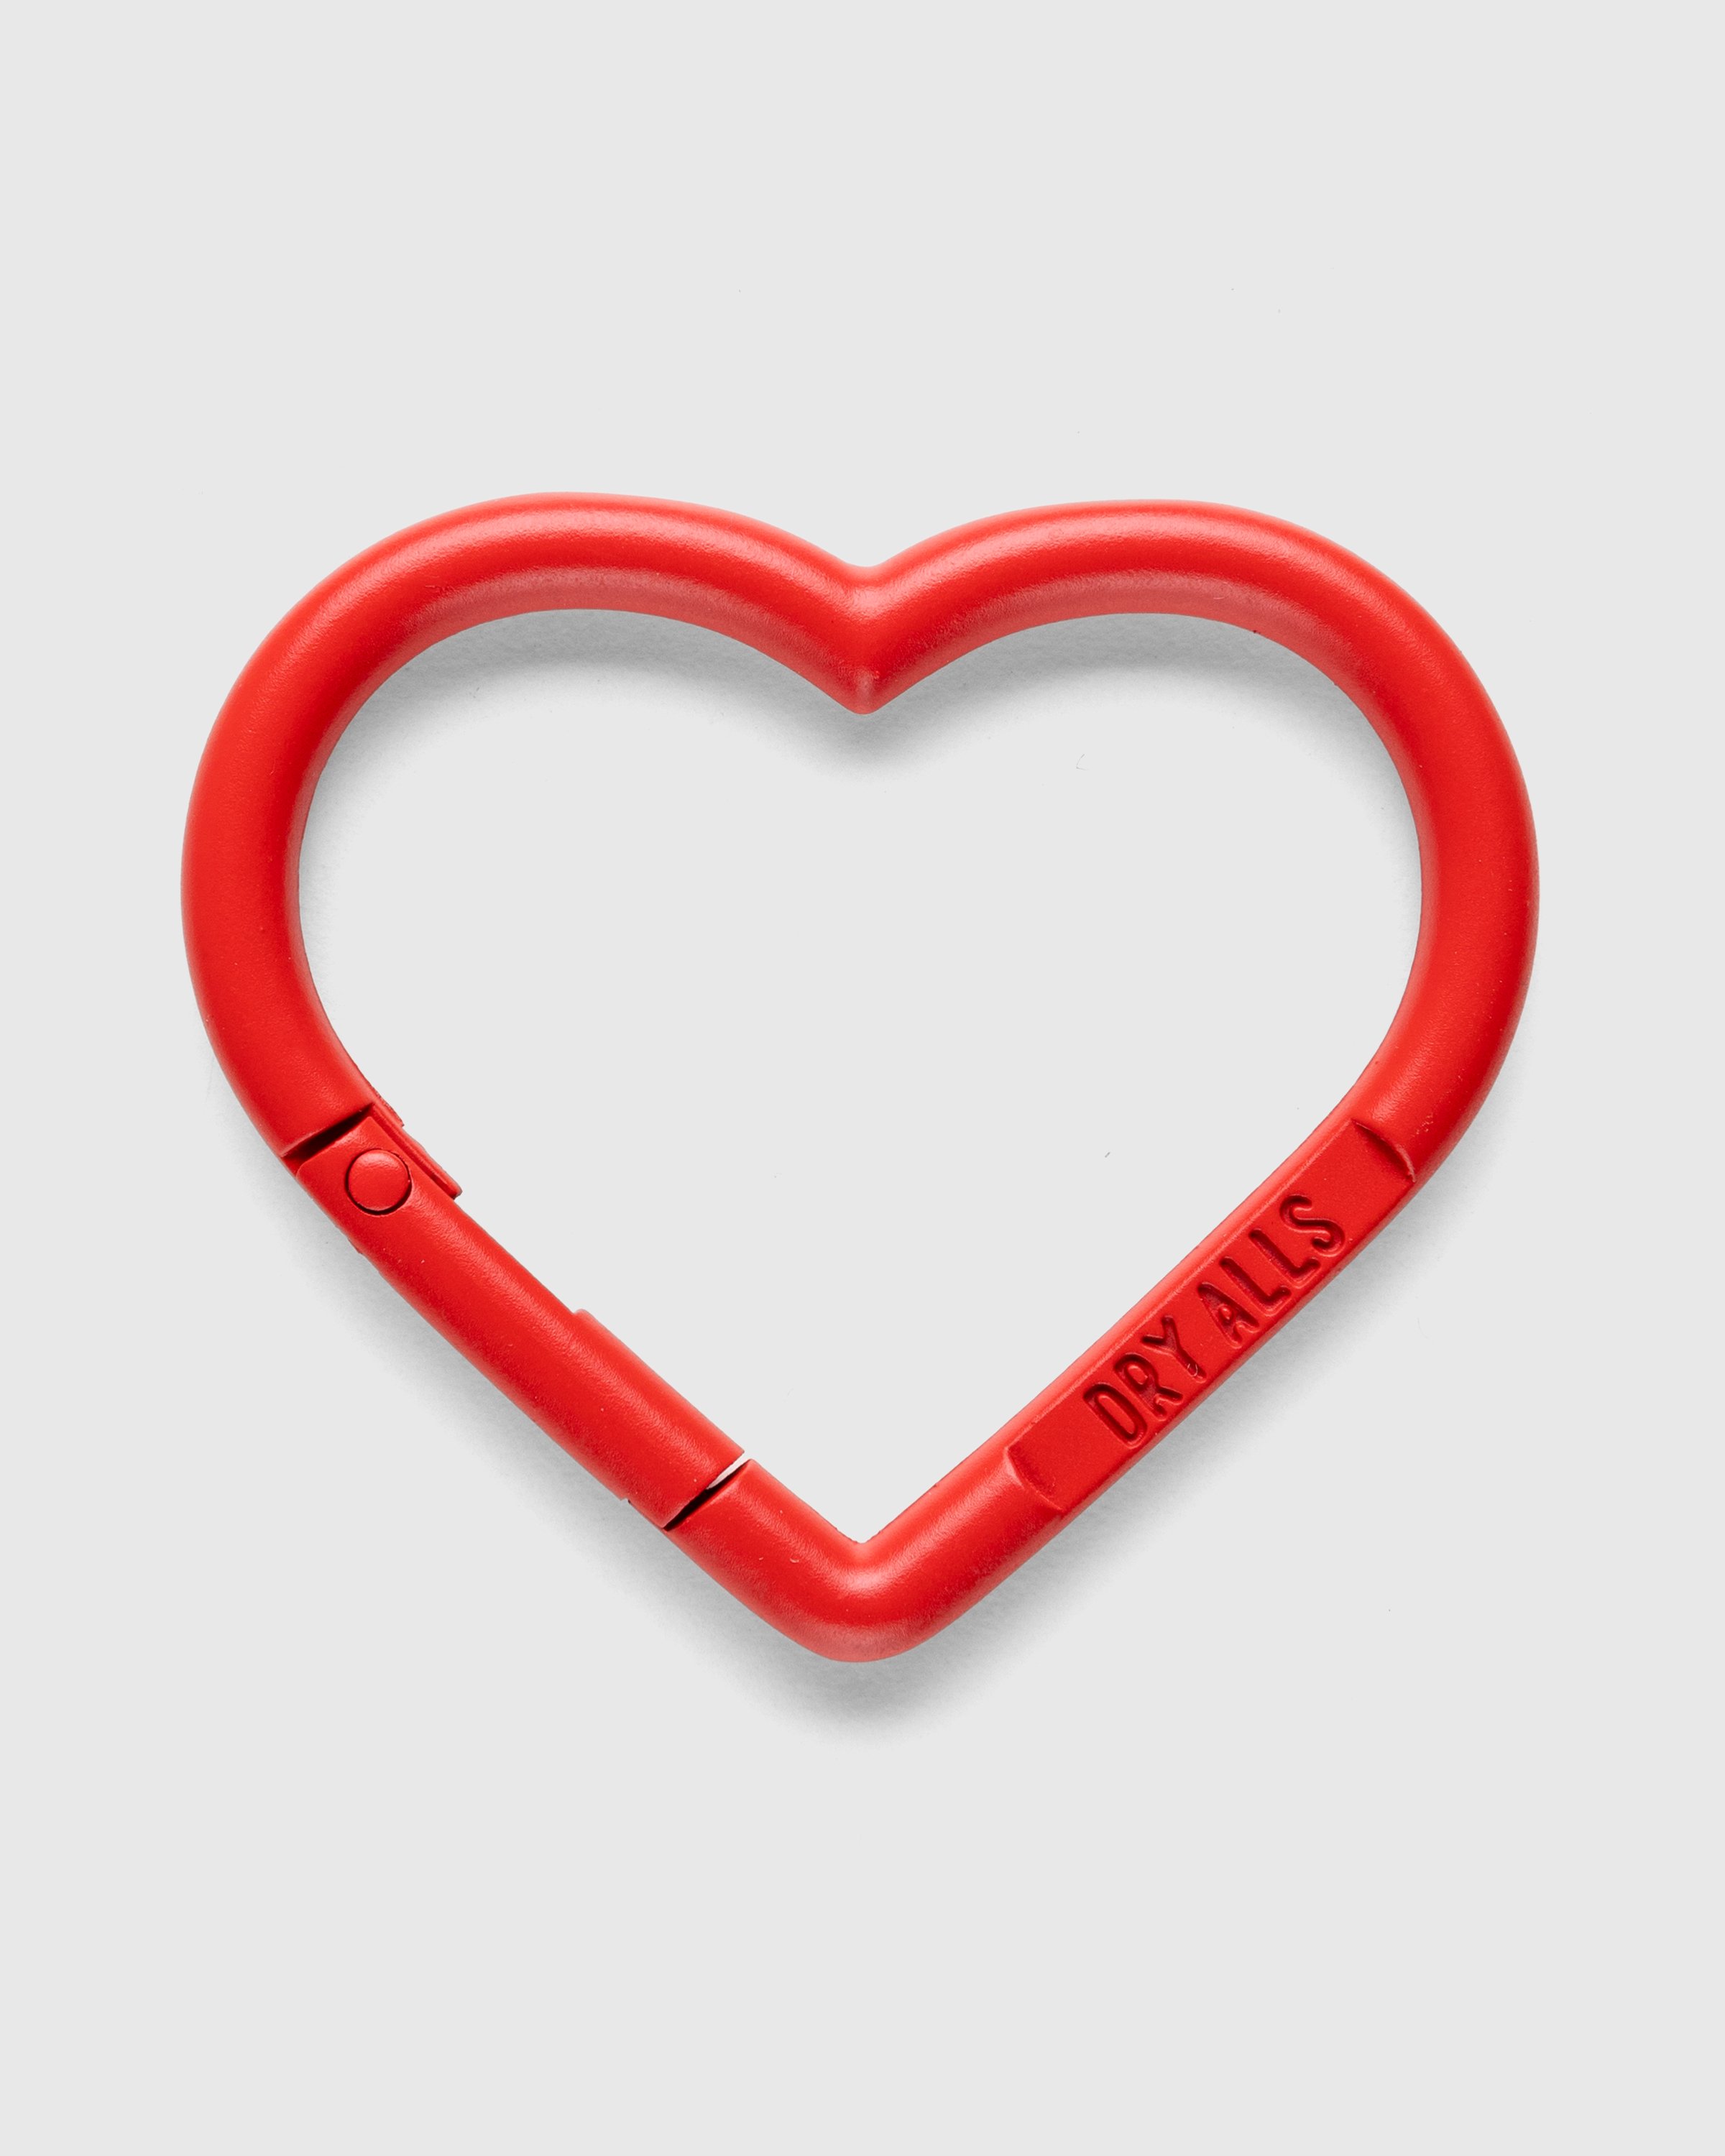 Human Made - HEART CARABINER RED - Accessories - Red - Image 2